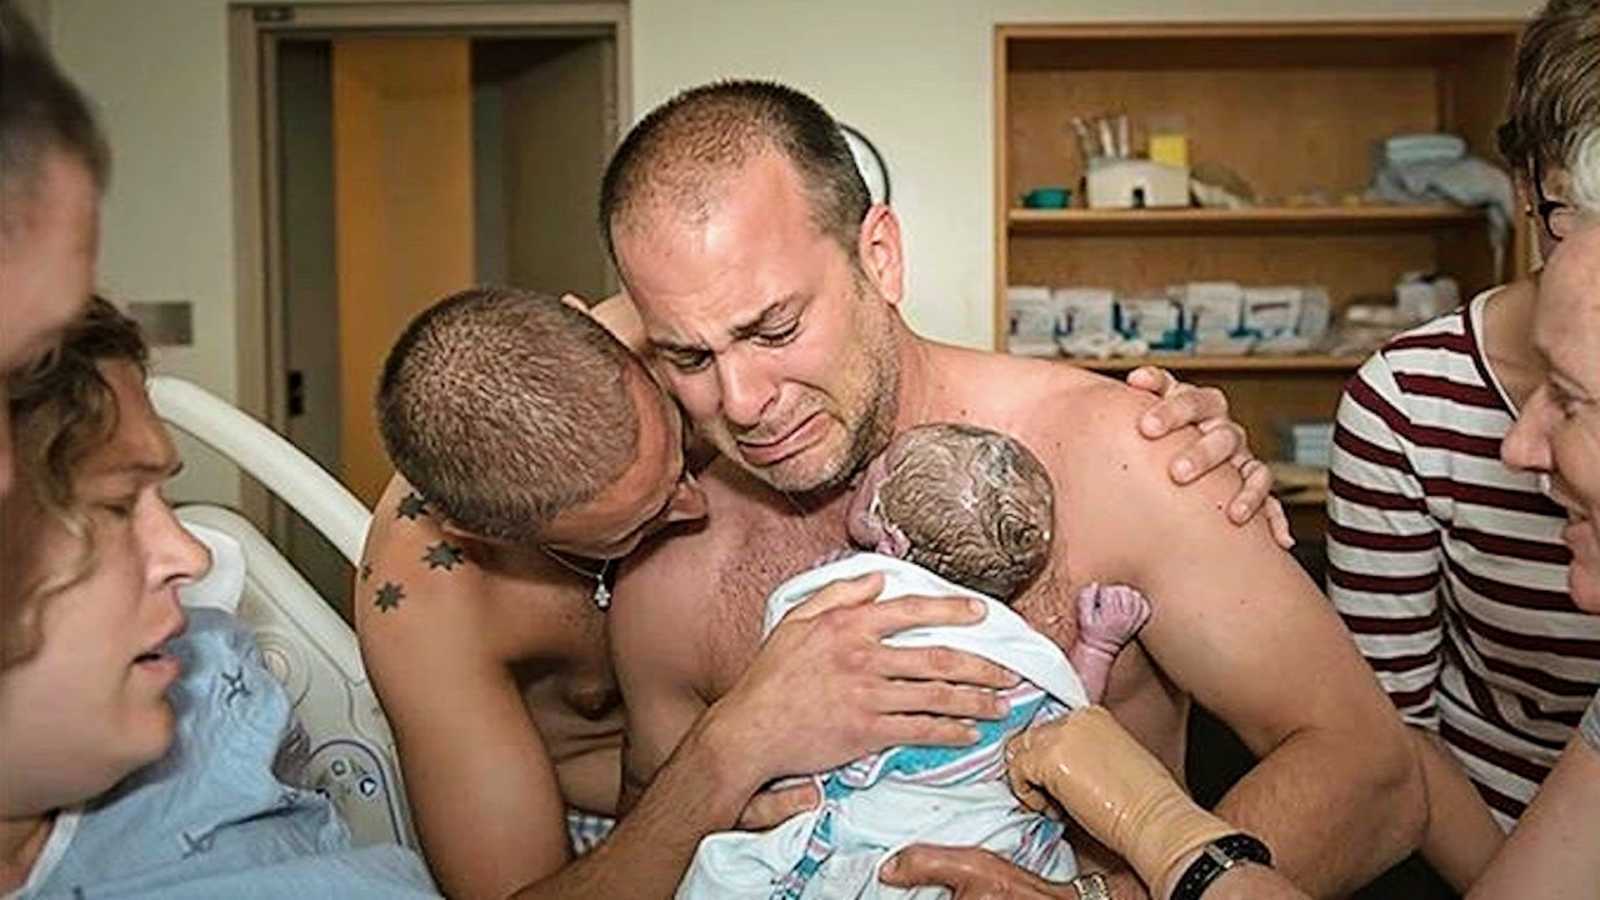 Crying new dads holding their newborn son shirtless in hospital